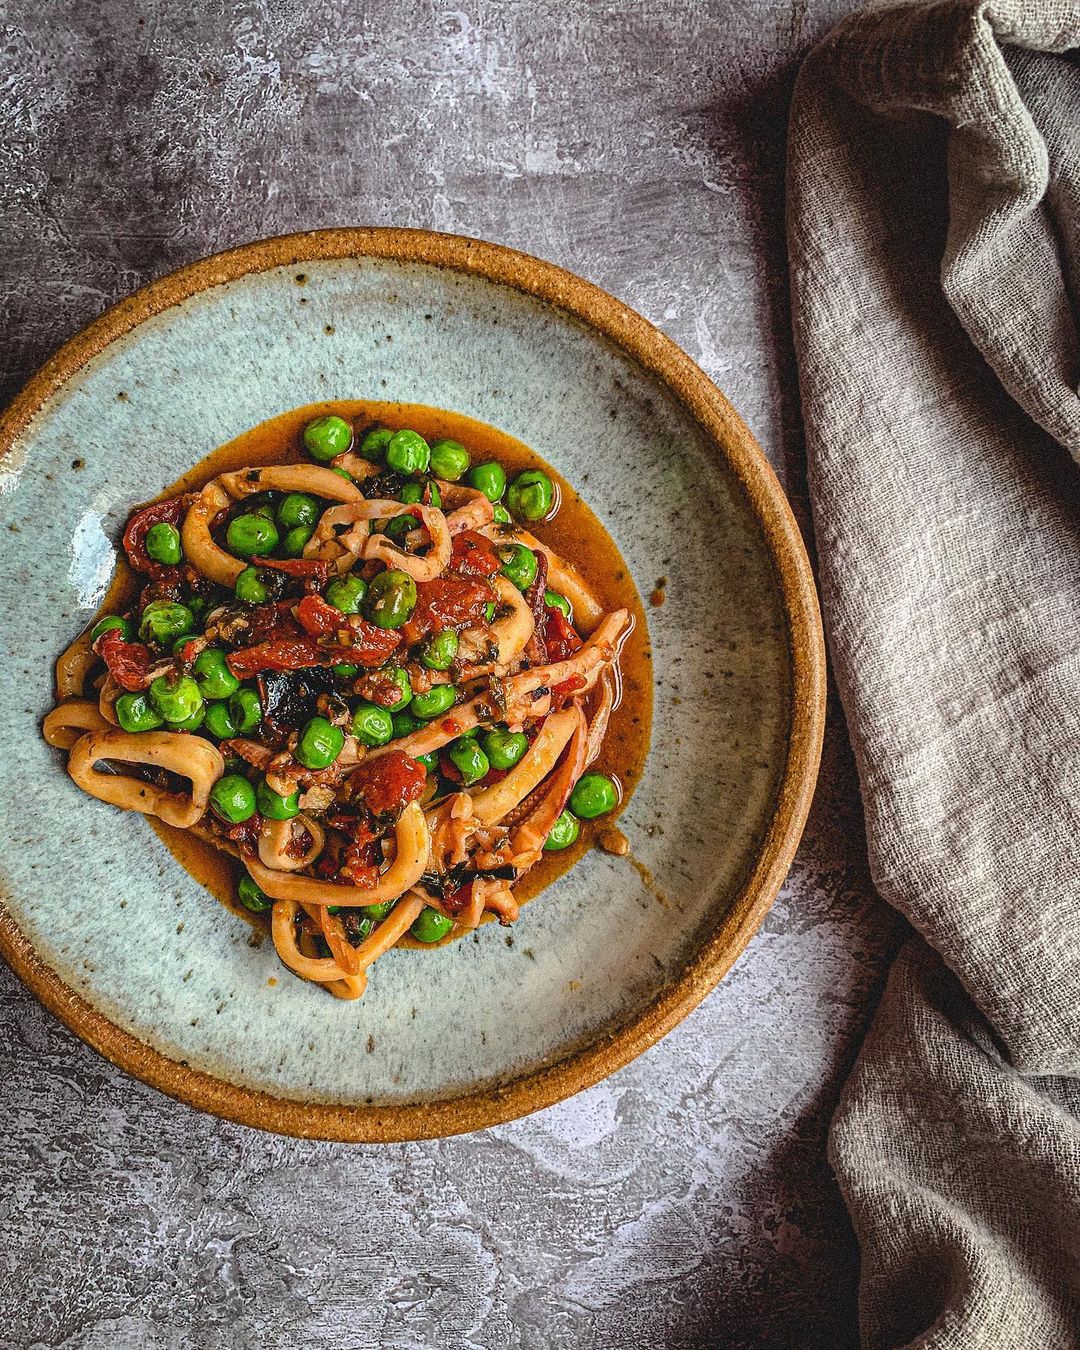 Squid W/ Tomatoes and Peas It